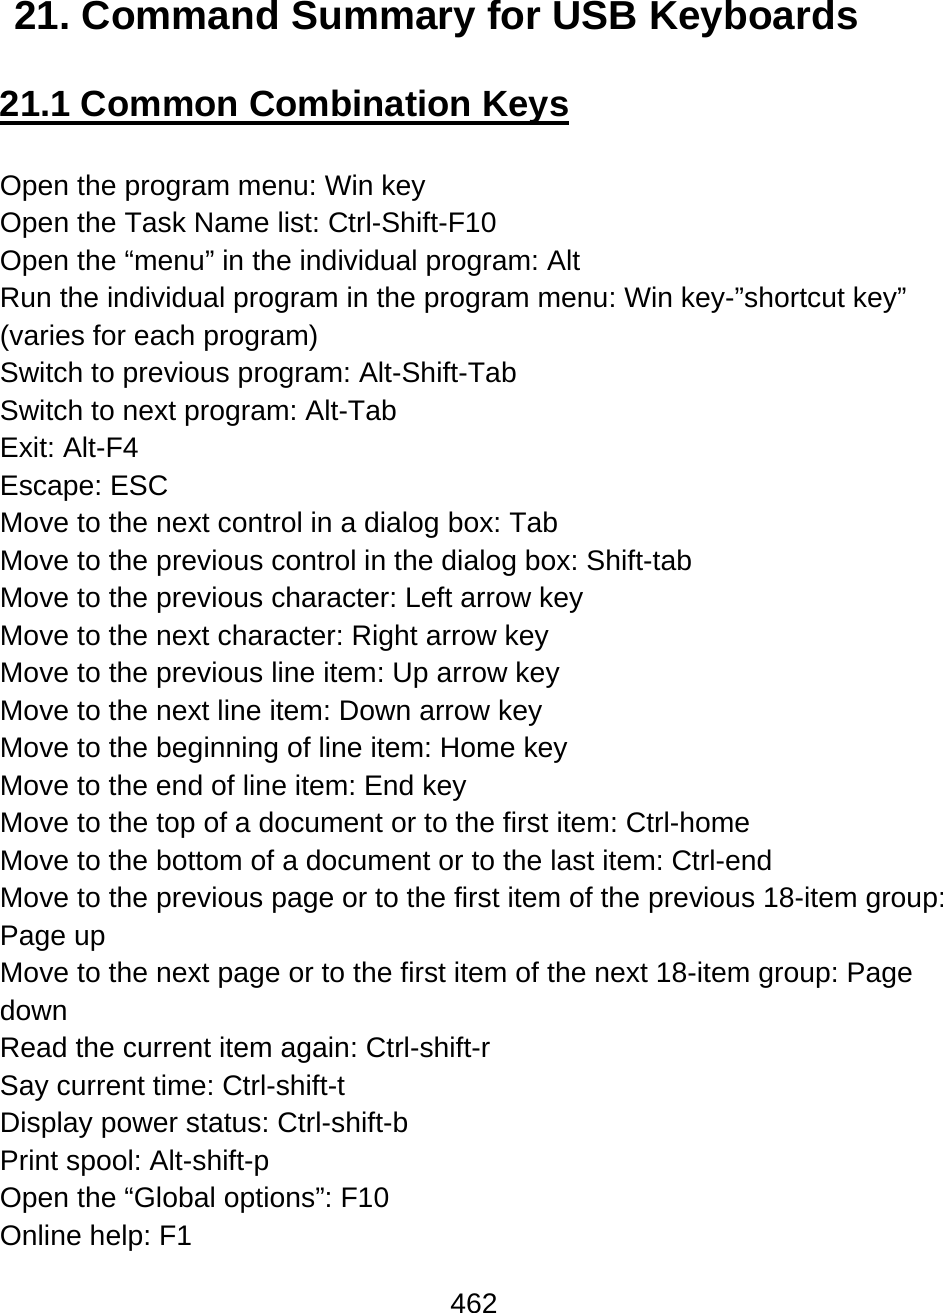 462  21. Command Summary for USB Keyboards  21.1 Common Combination Keys  Open the program menu: Win key Open the Task Name list: Ctrl-Shift-F10 Open the “menu” in the individual program: Alt  Run the individual program in the program menu: Win key-”shortcut key” (varies for each program) Switch to previous program: Alt-Shift-Tab Switch to next program: Alt-Tab Exit: Alt-F4 Escape: ESC Move to the next control in a dialog box: Tab Move to the previous control in the dialog box: Shift-tab Move to the previous character: Left arrow key Move to the next character: Right arrow key Move to the previous line item: Up arrow key Move to the next line item: Down arrow key Move to the beginning of line item: Home key Move to the end of line item: End key Move to the top of a document or to the first item: Ctrl-home Move to the bottom of a document or to the last item: Ctrl-end Move to the previous page or to the first item of the previous 18-item group: Page up Move to the next page or to the first item of the next 18-item group: Page down Read the current item again: Ctrl-shift-r Say current time: Ctrl-shift-t Display power status: Ctrl-shift-b Print spool: Alt-shift-p Open the “Global options”: F10 Online help: F1 